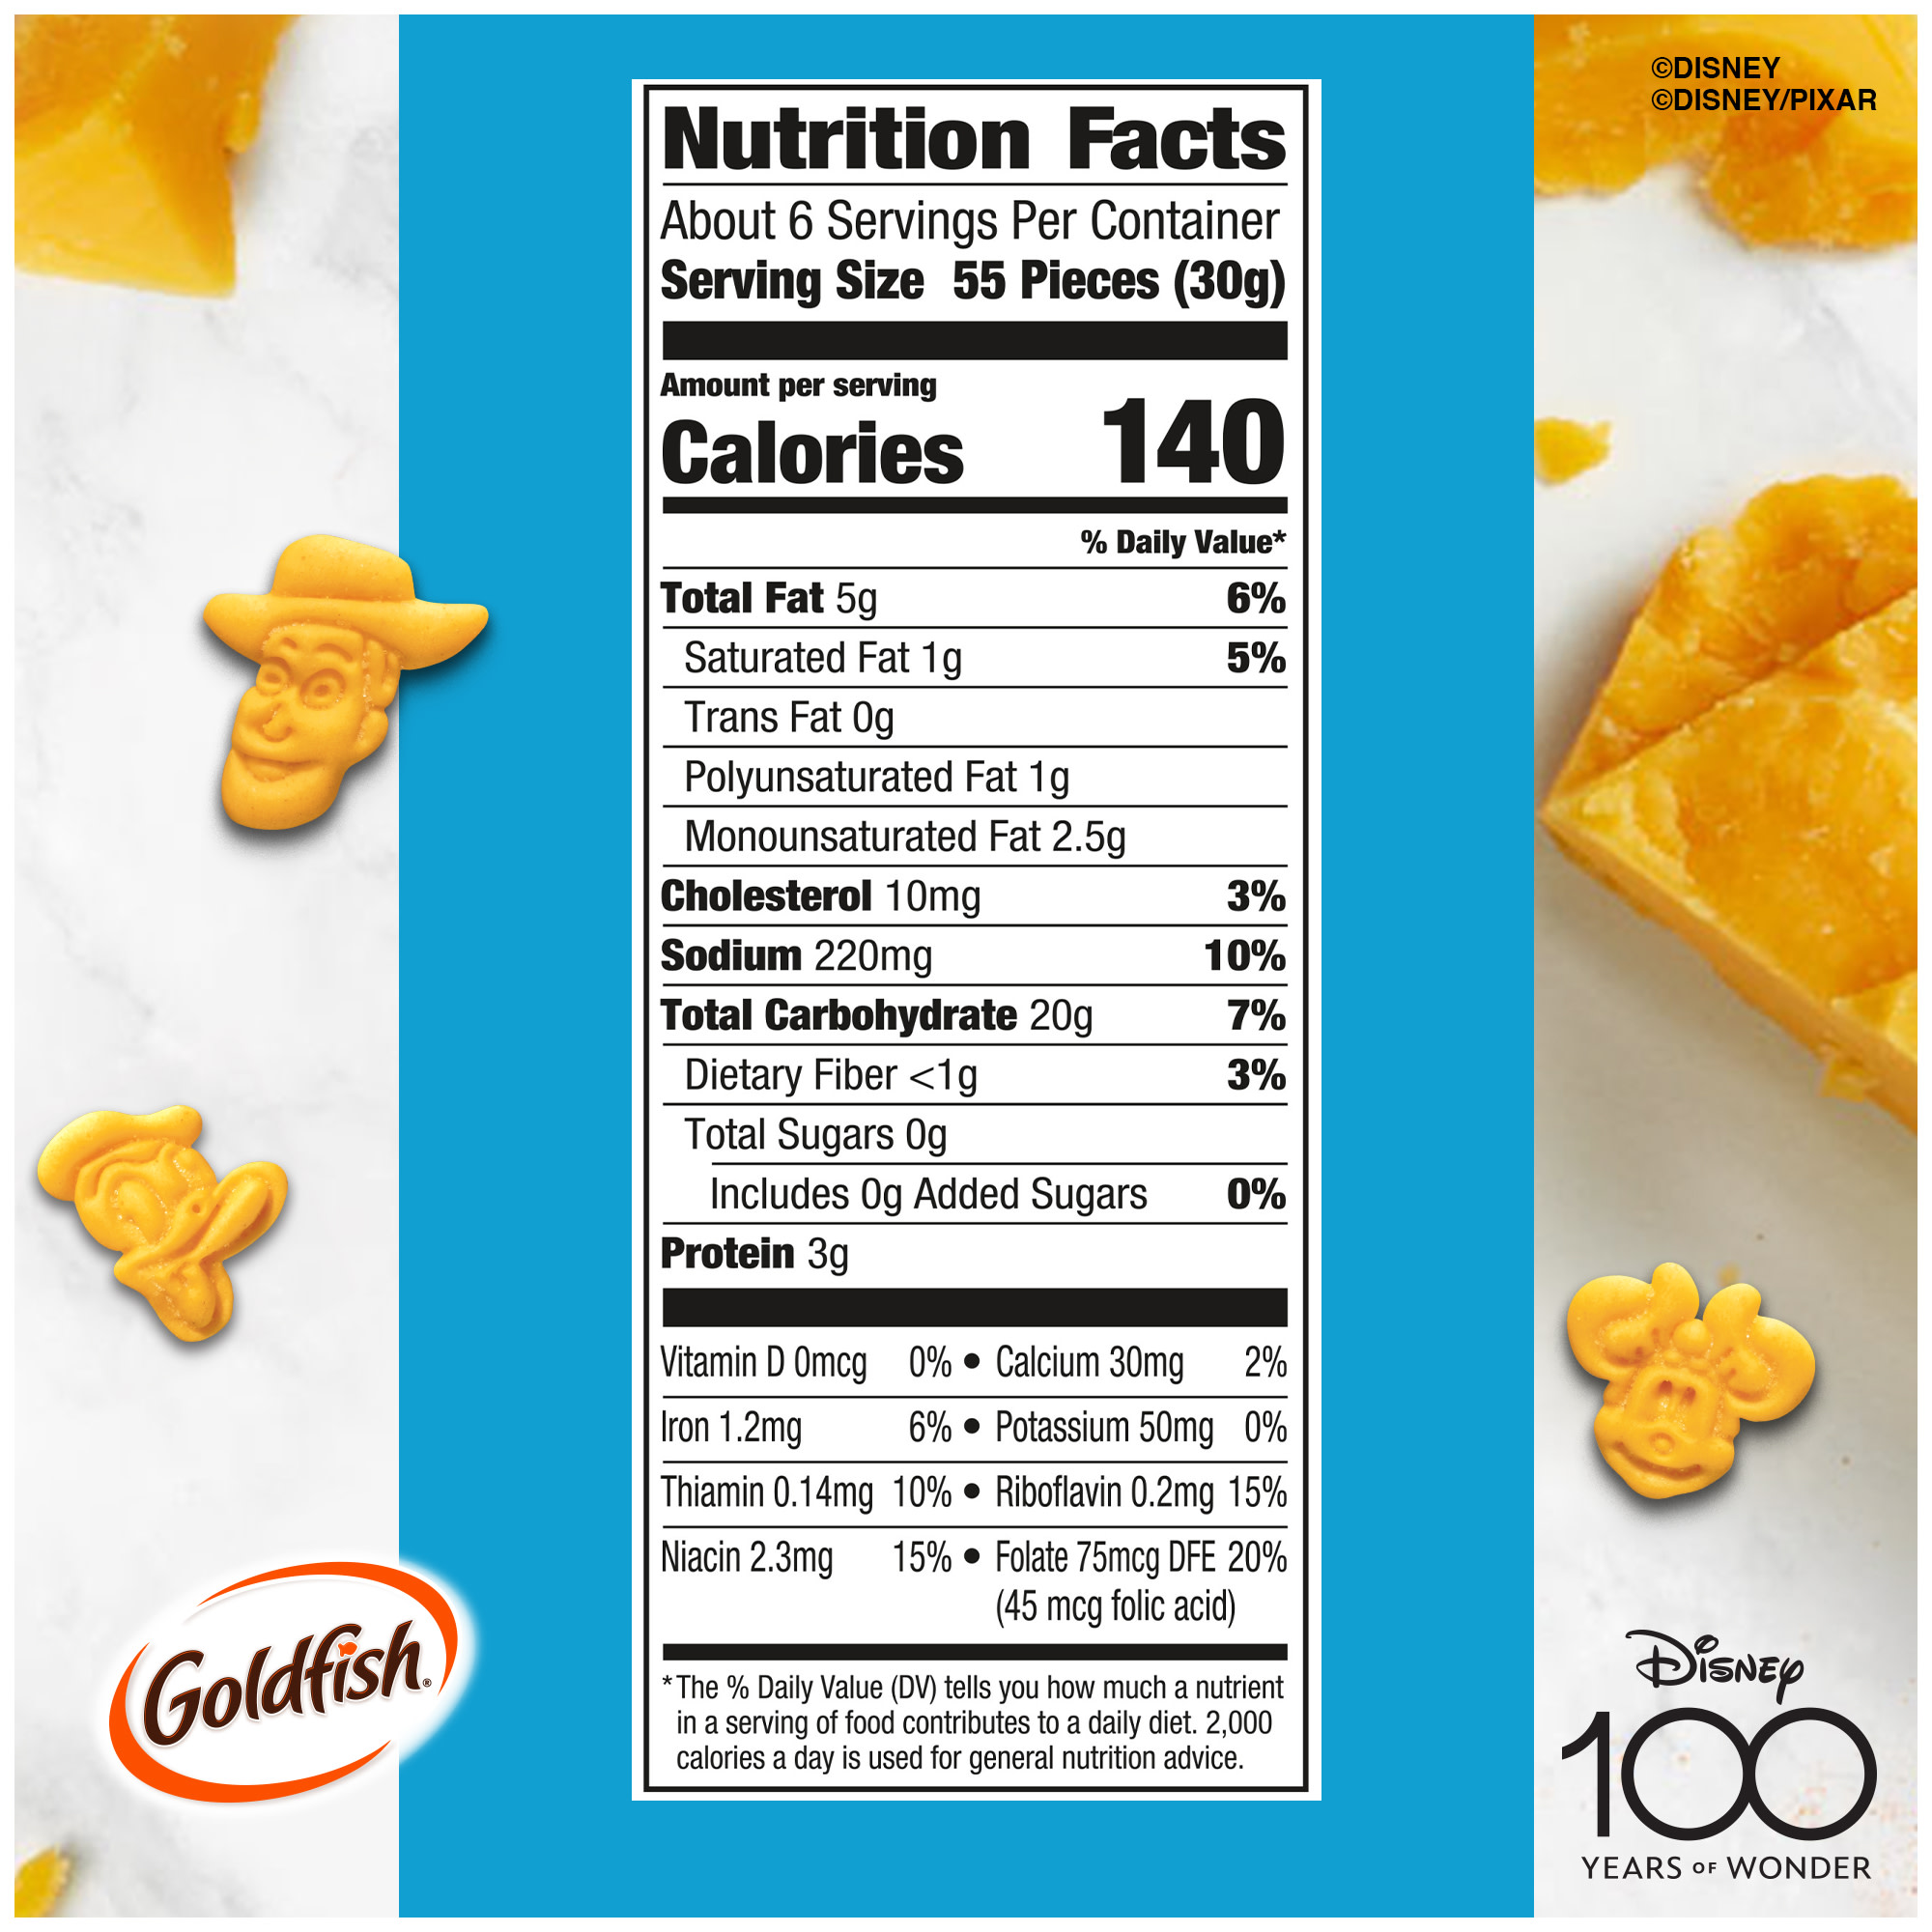 Goldfish Limited Edition Disney 100th Cheddar Crackers, Snack Crackers, 6.6 oz bag - image 5 of 10